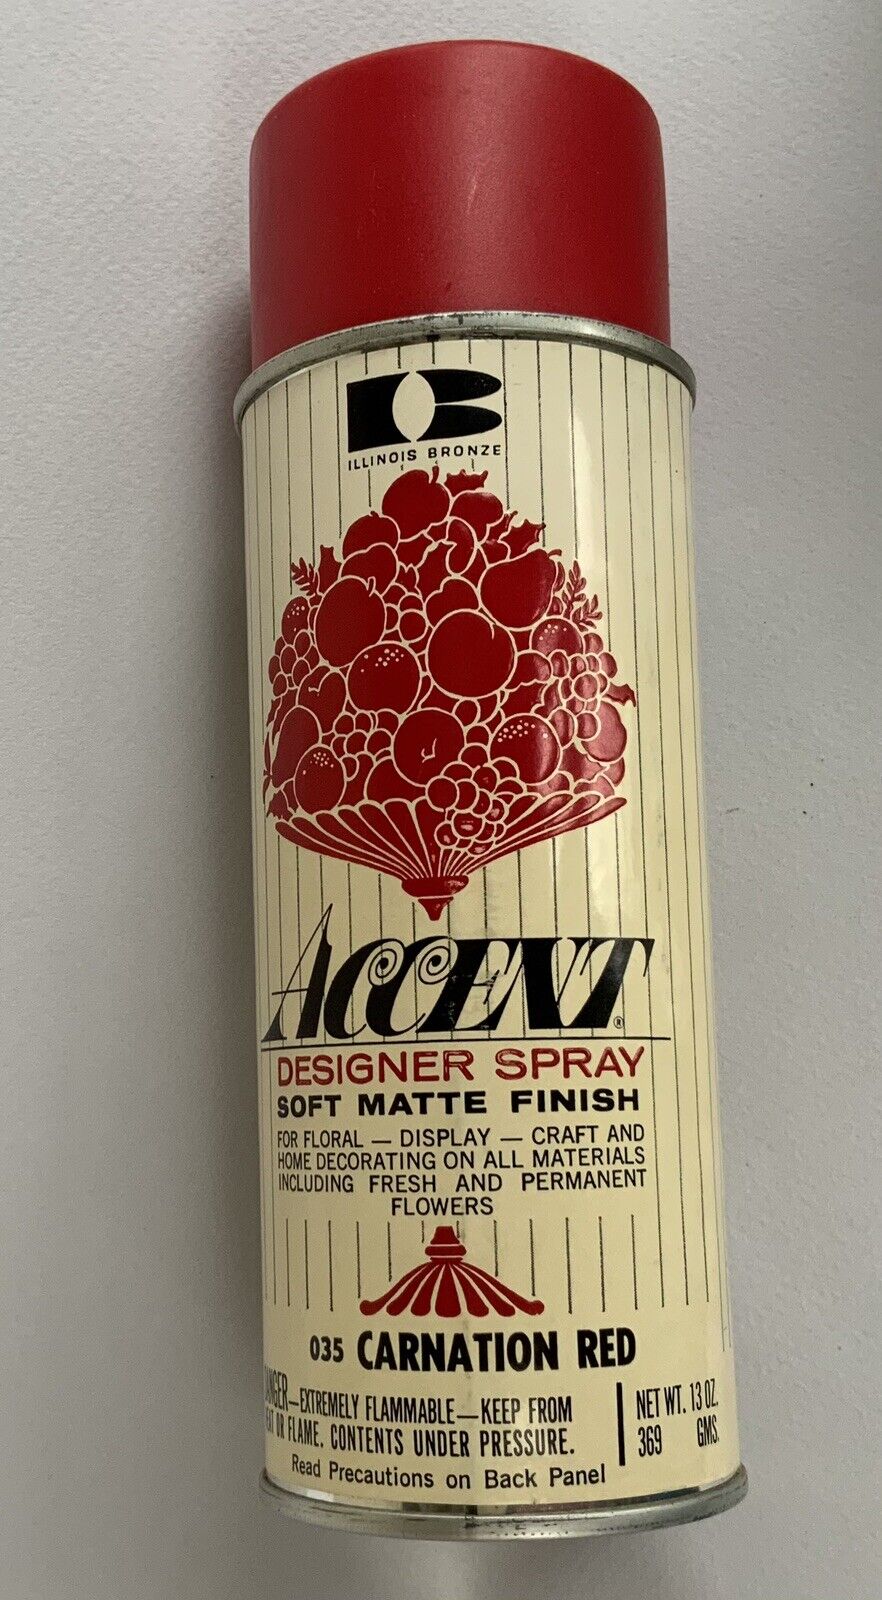 Illinois Bronze VTG Spray Paint Can Accent 035 Carnation Red Paper Label 1966